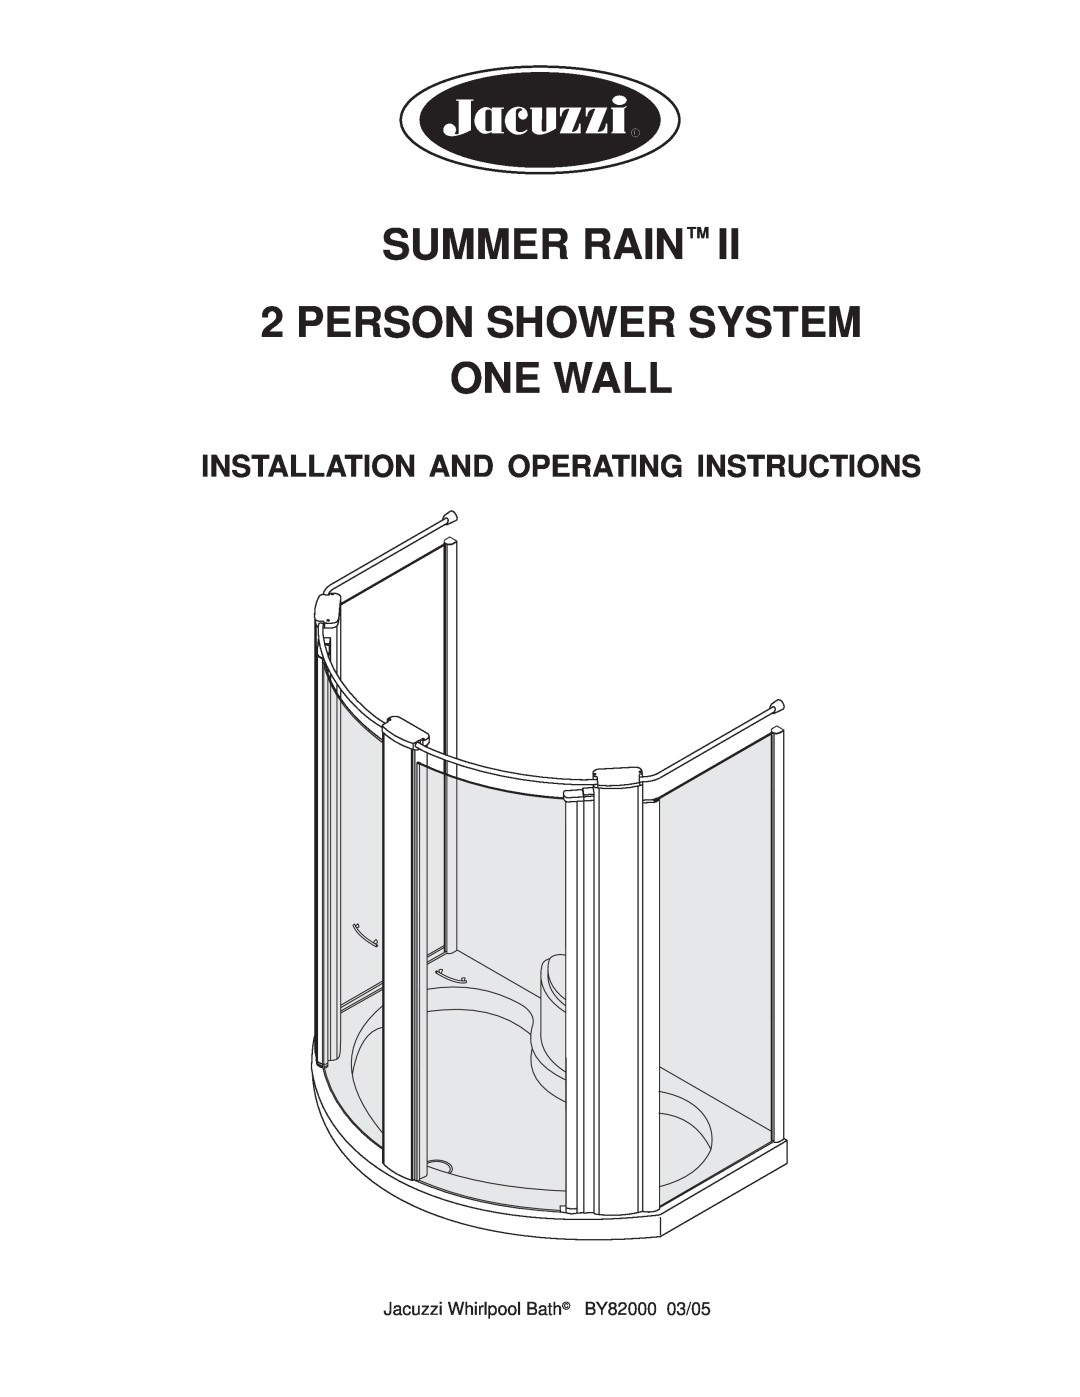 Jacuzzi BY82000 manual SUMMER RAIN 2 PERSON SHOWER SYSTEM ONE WALL, Installation And Operating Instructions 